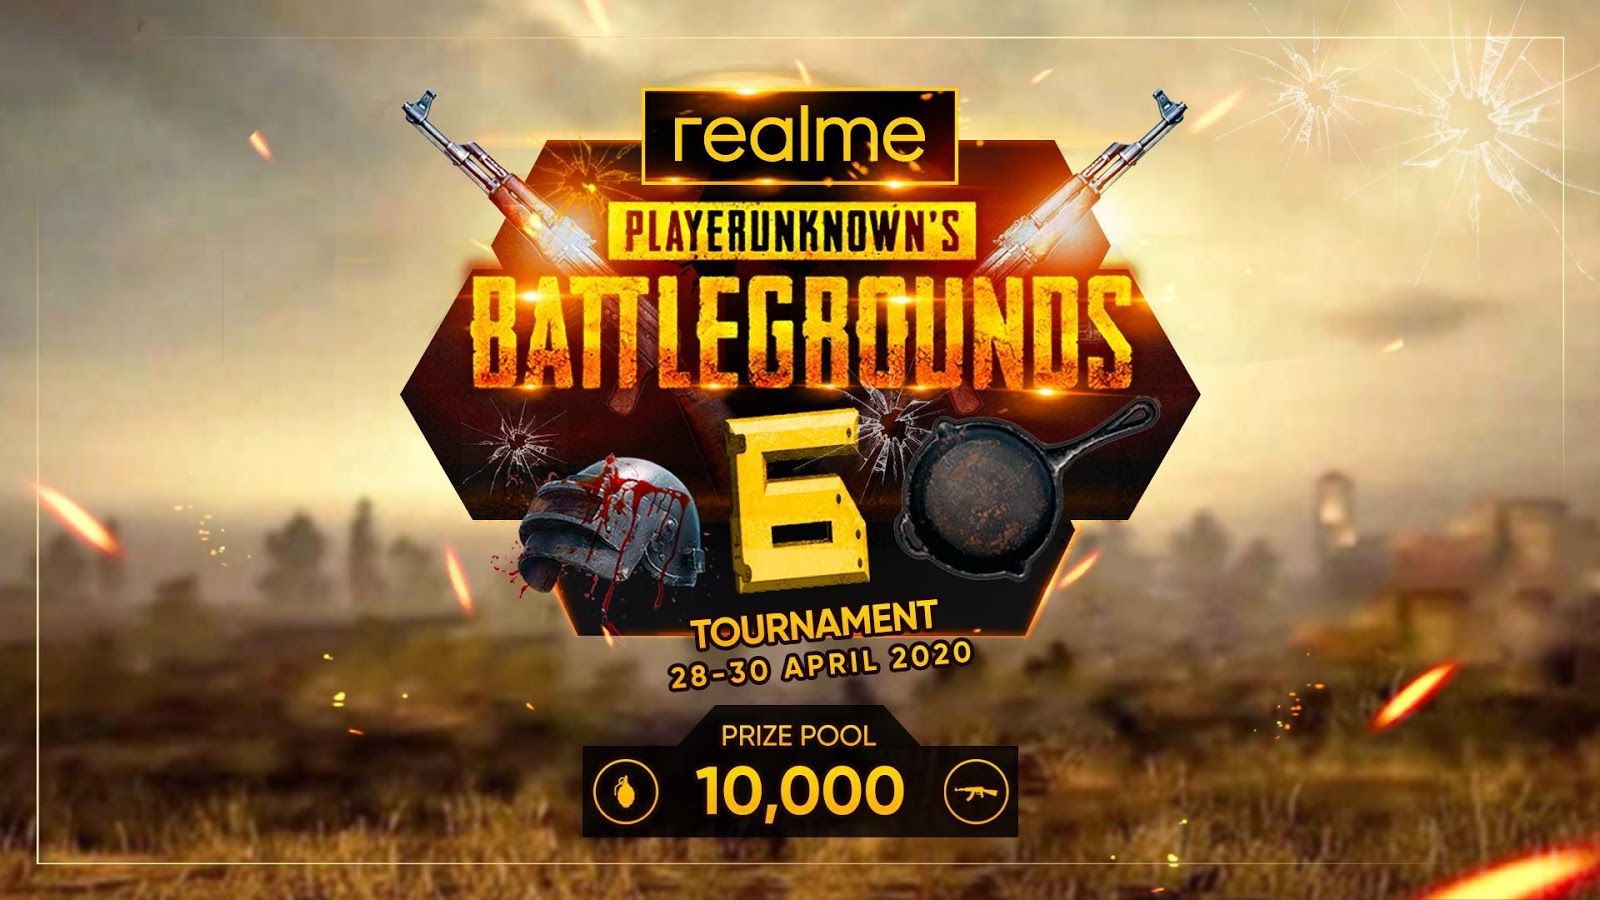 Sugoi Days: PUBG Fans, Get Your Realme Ready to #StayREALathome with realme 6 Tournament